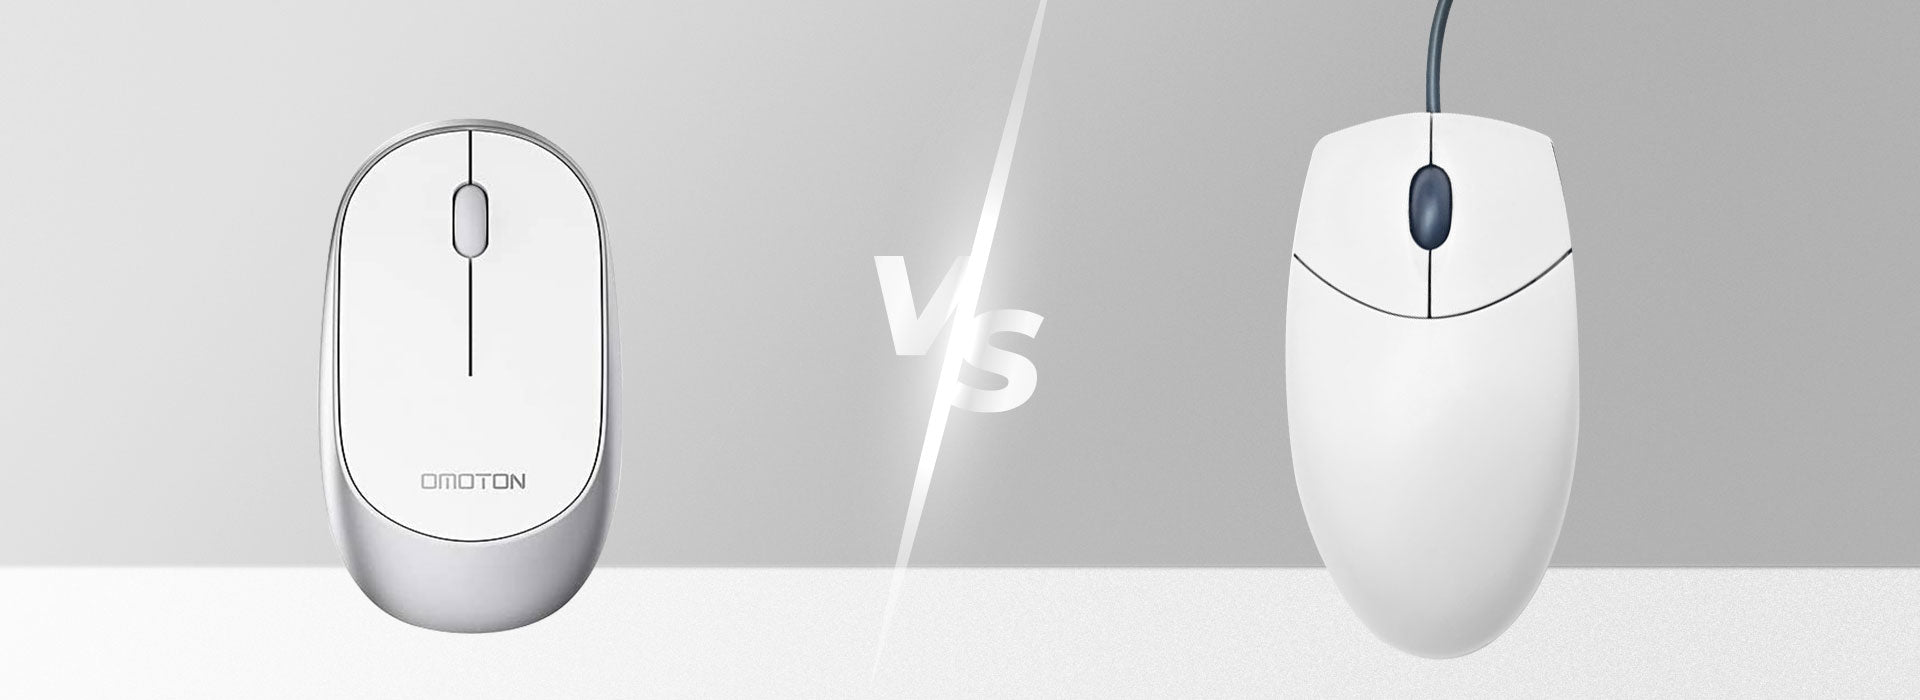 Wired Vs Wireless Mouse? Which one to go for? Let's Find Out